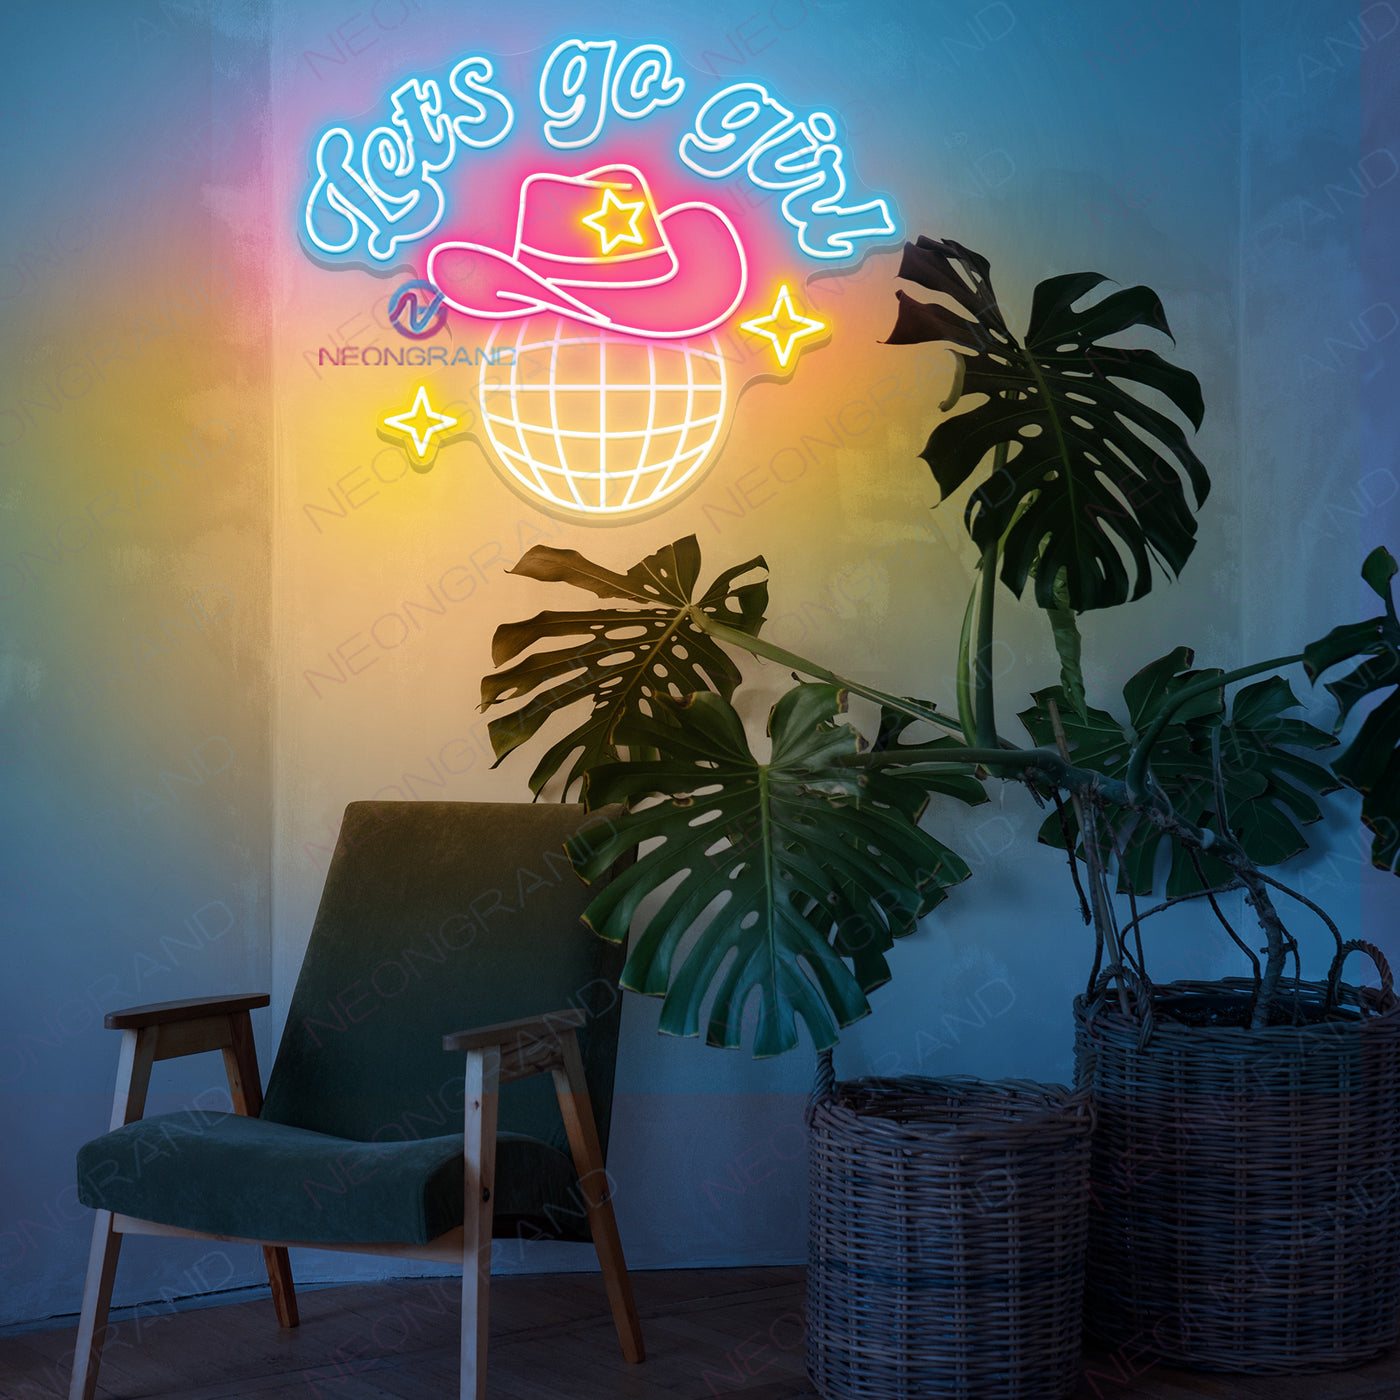 Lets Go Girls Neon Sign Party Led Light light yellow